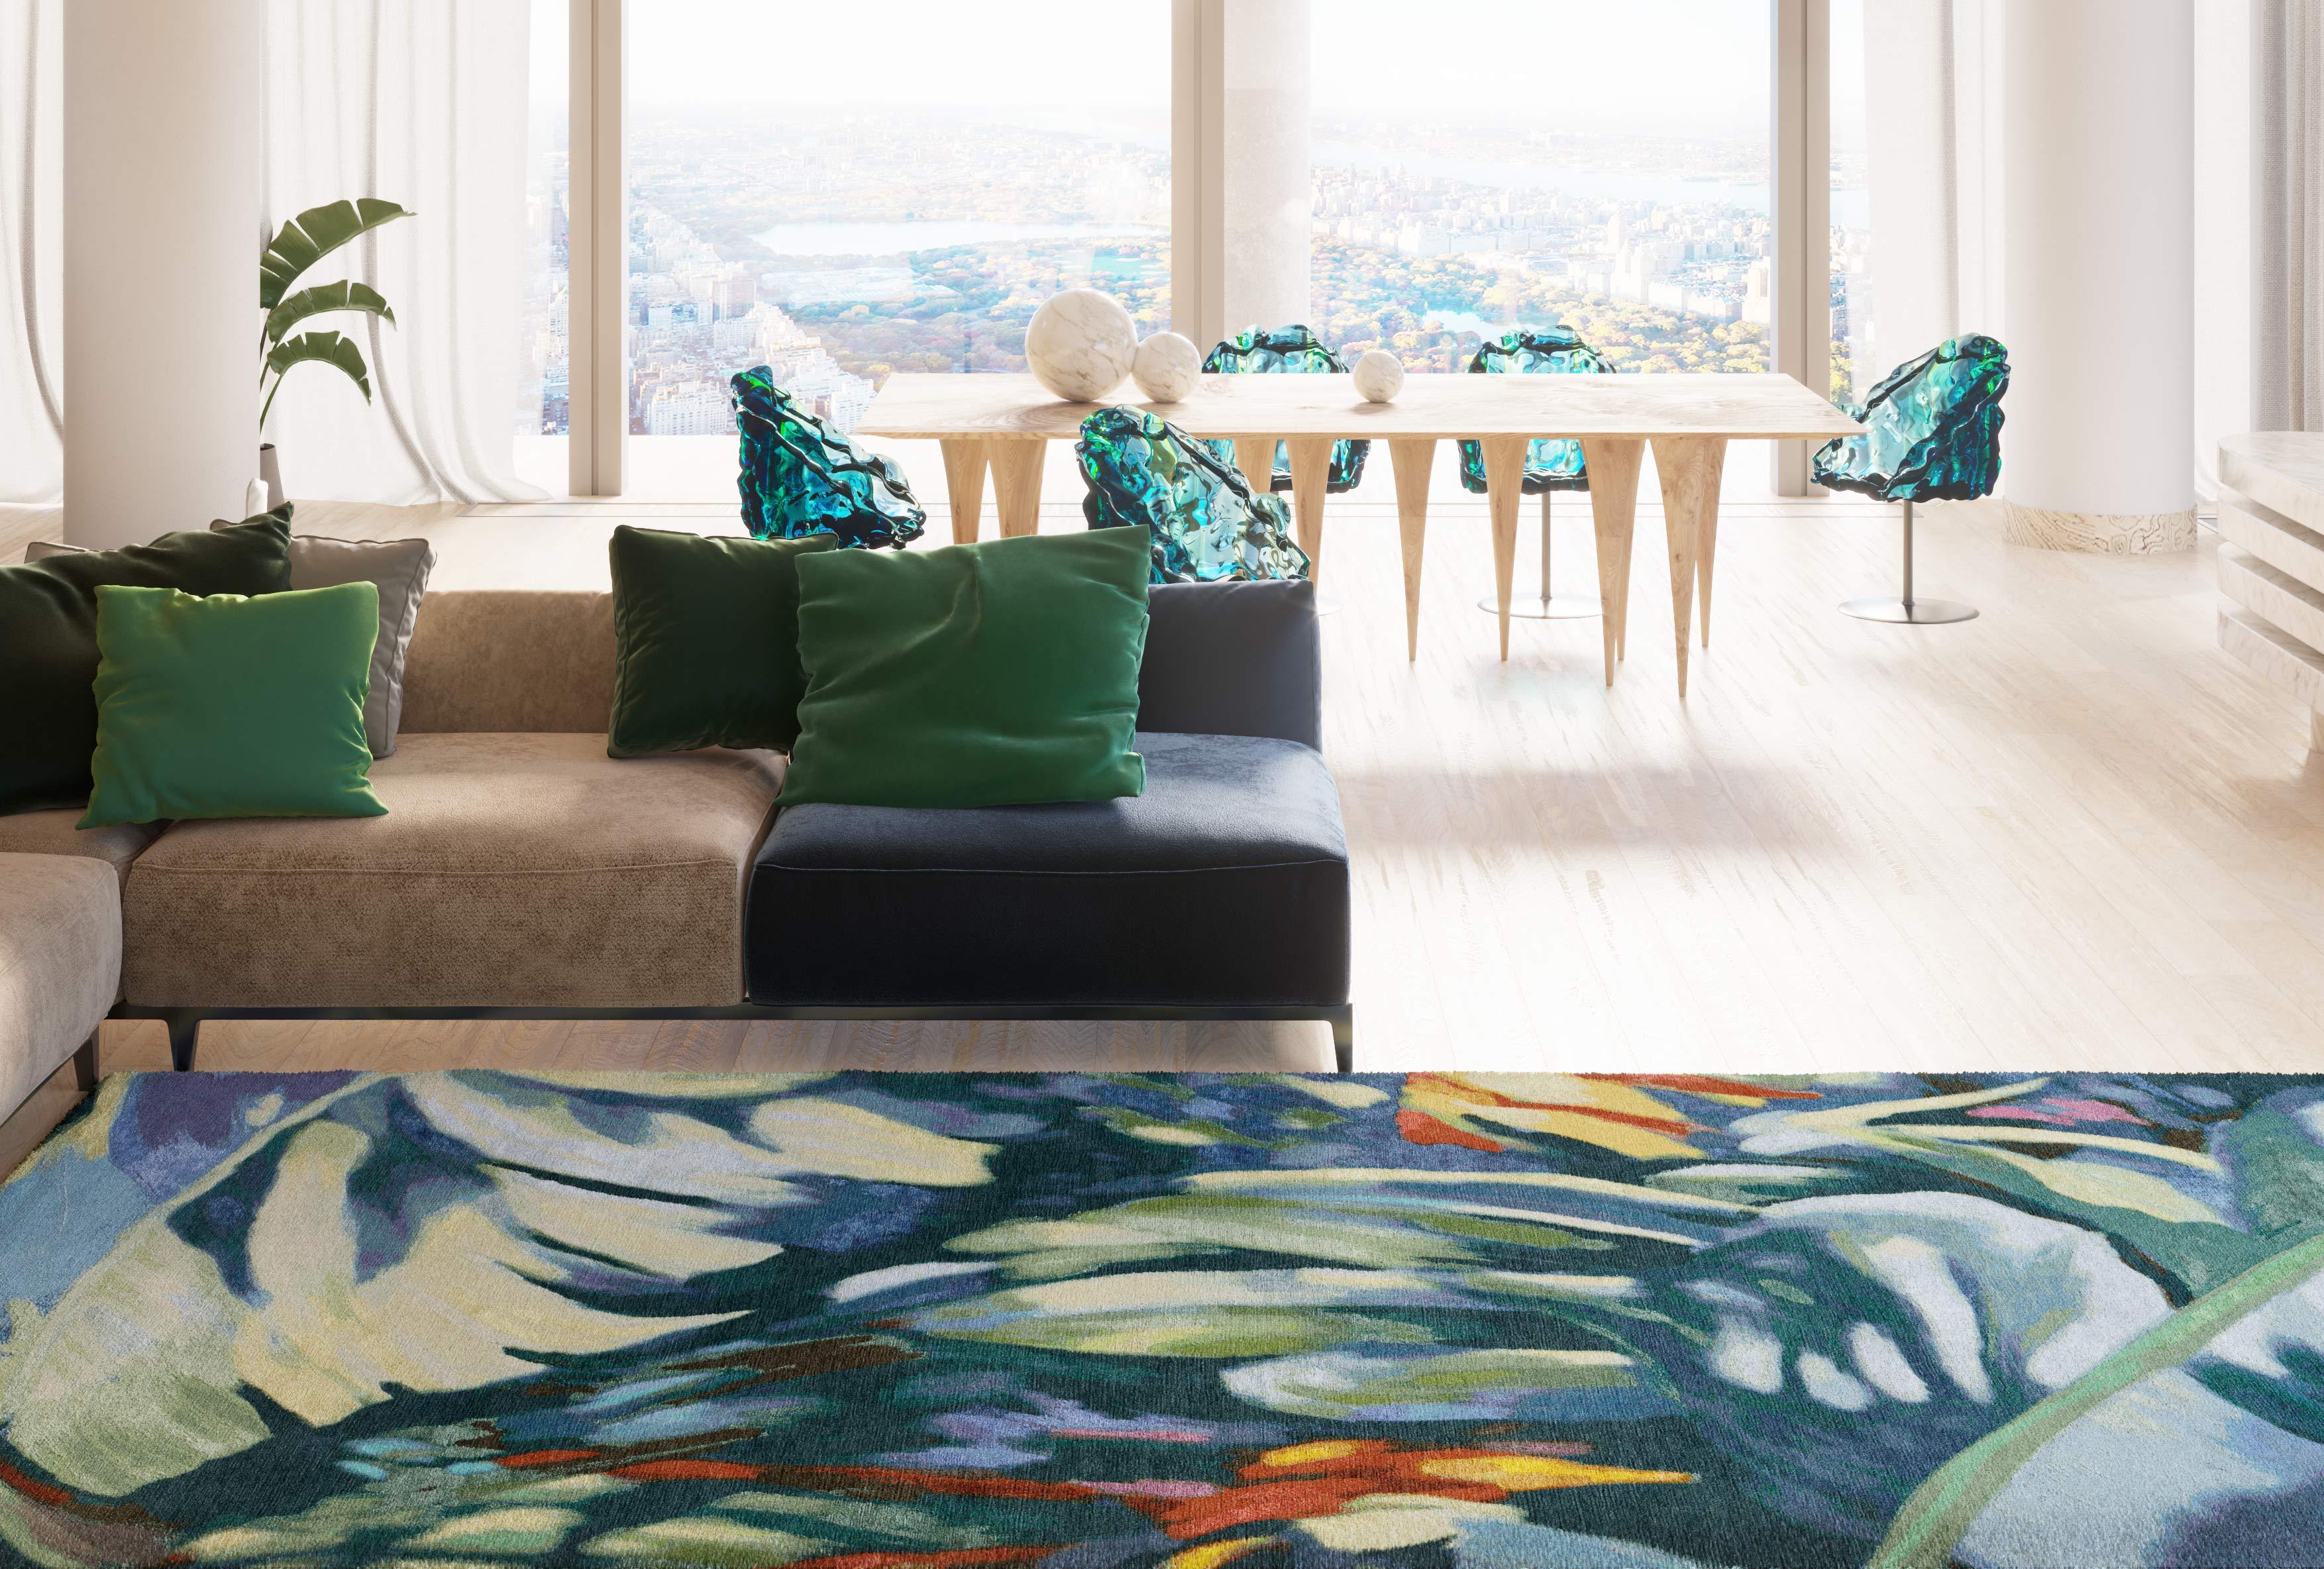 The Rainforest rug pattern immerses you in a tropical atmosphere. Its bright colors are sure to bring a special charm to your interior. 
The rug is handmade from natural materials with a high weave density of 80 knots per inch. Rainforest will allow